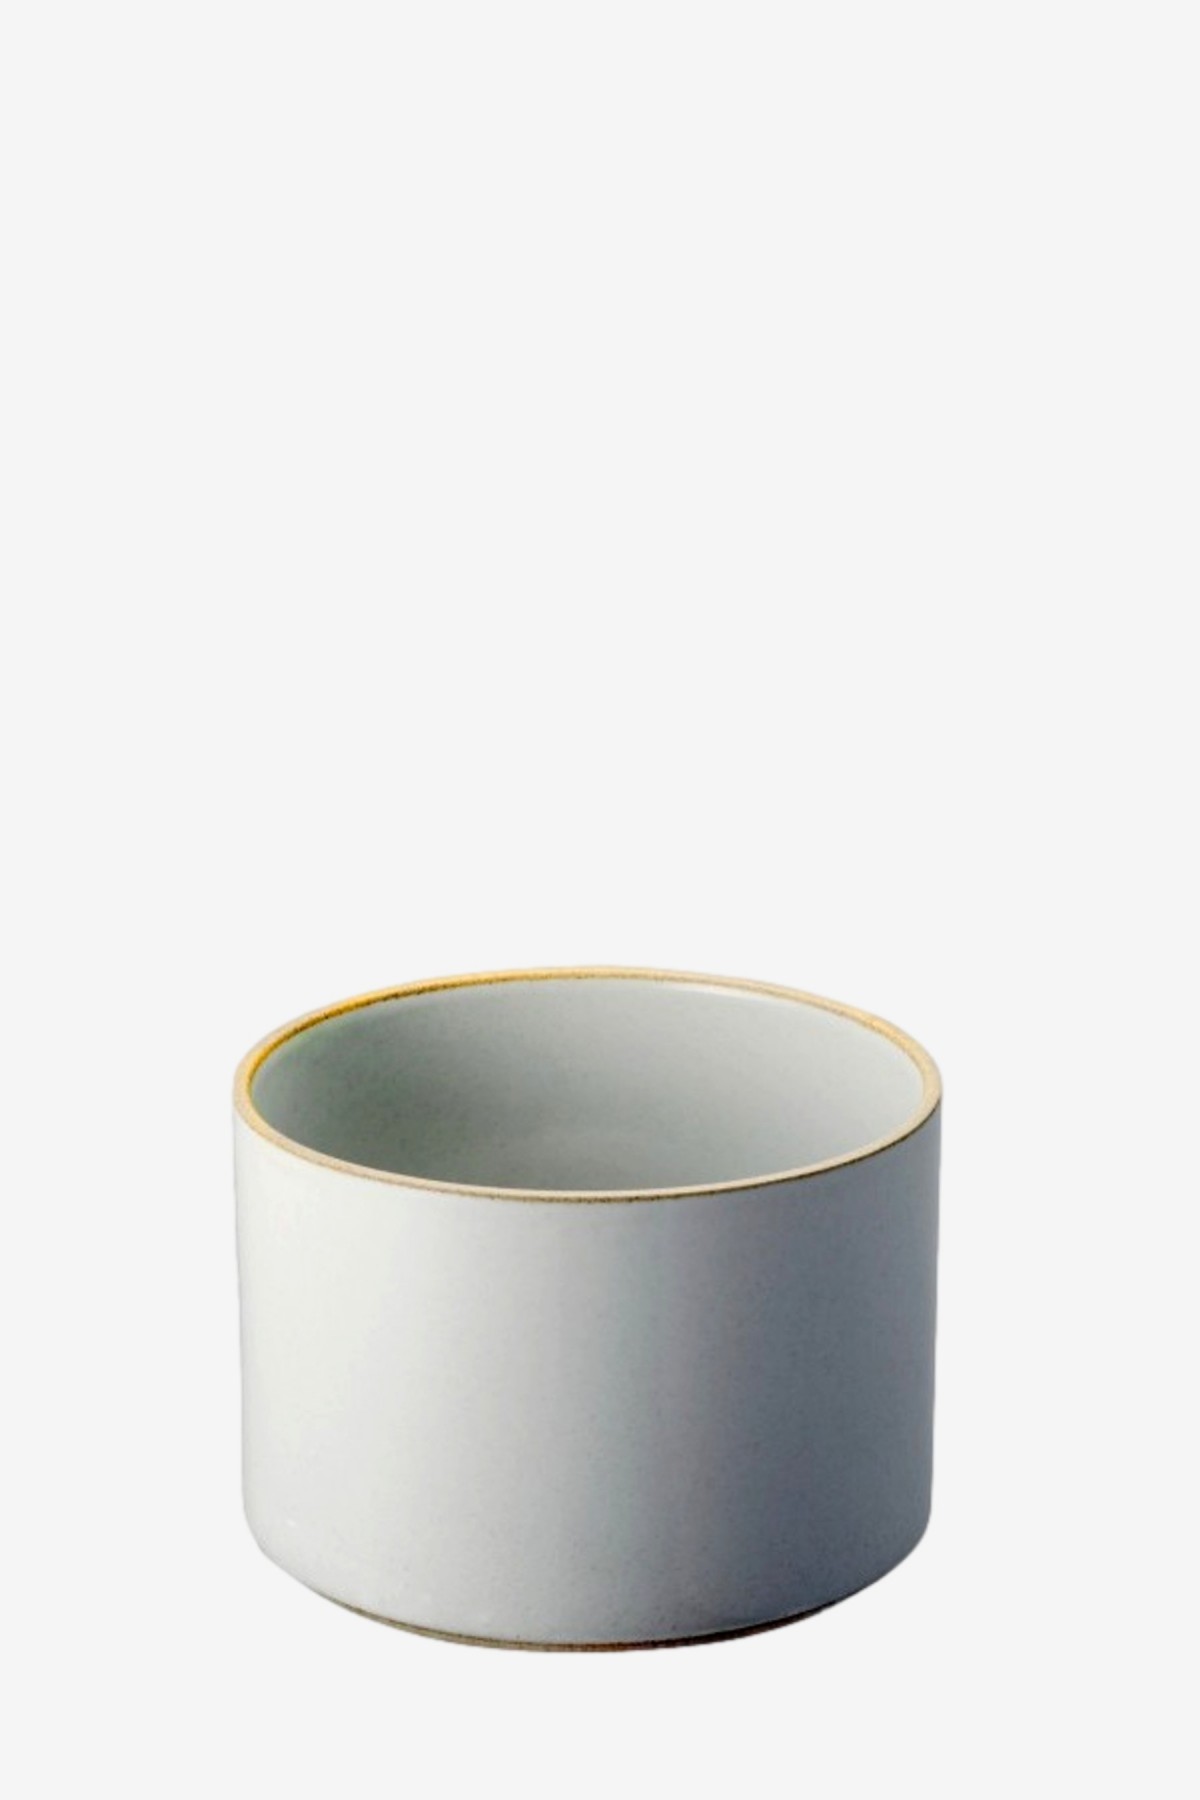 Hasami Porcelain Planter 145×106mm in Clear Grey